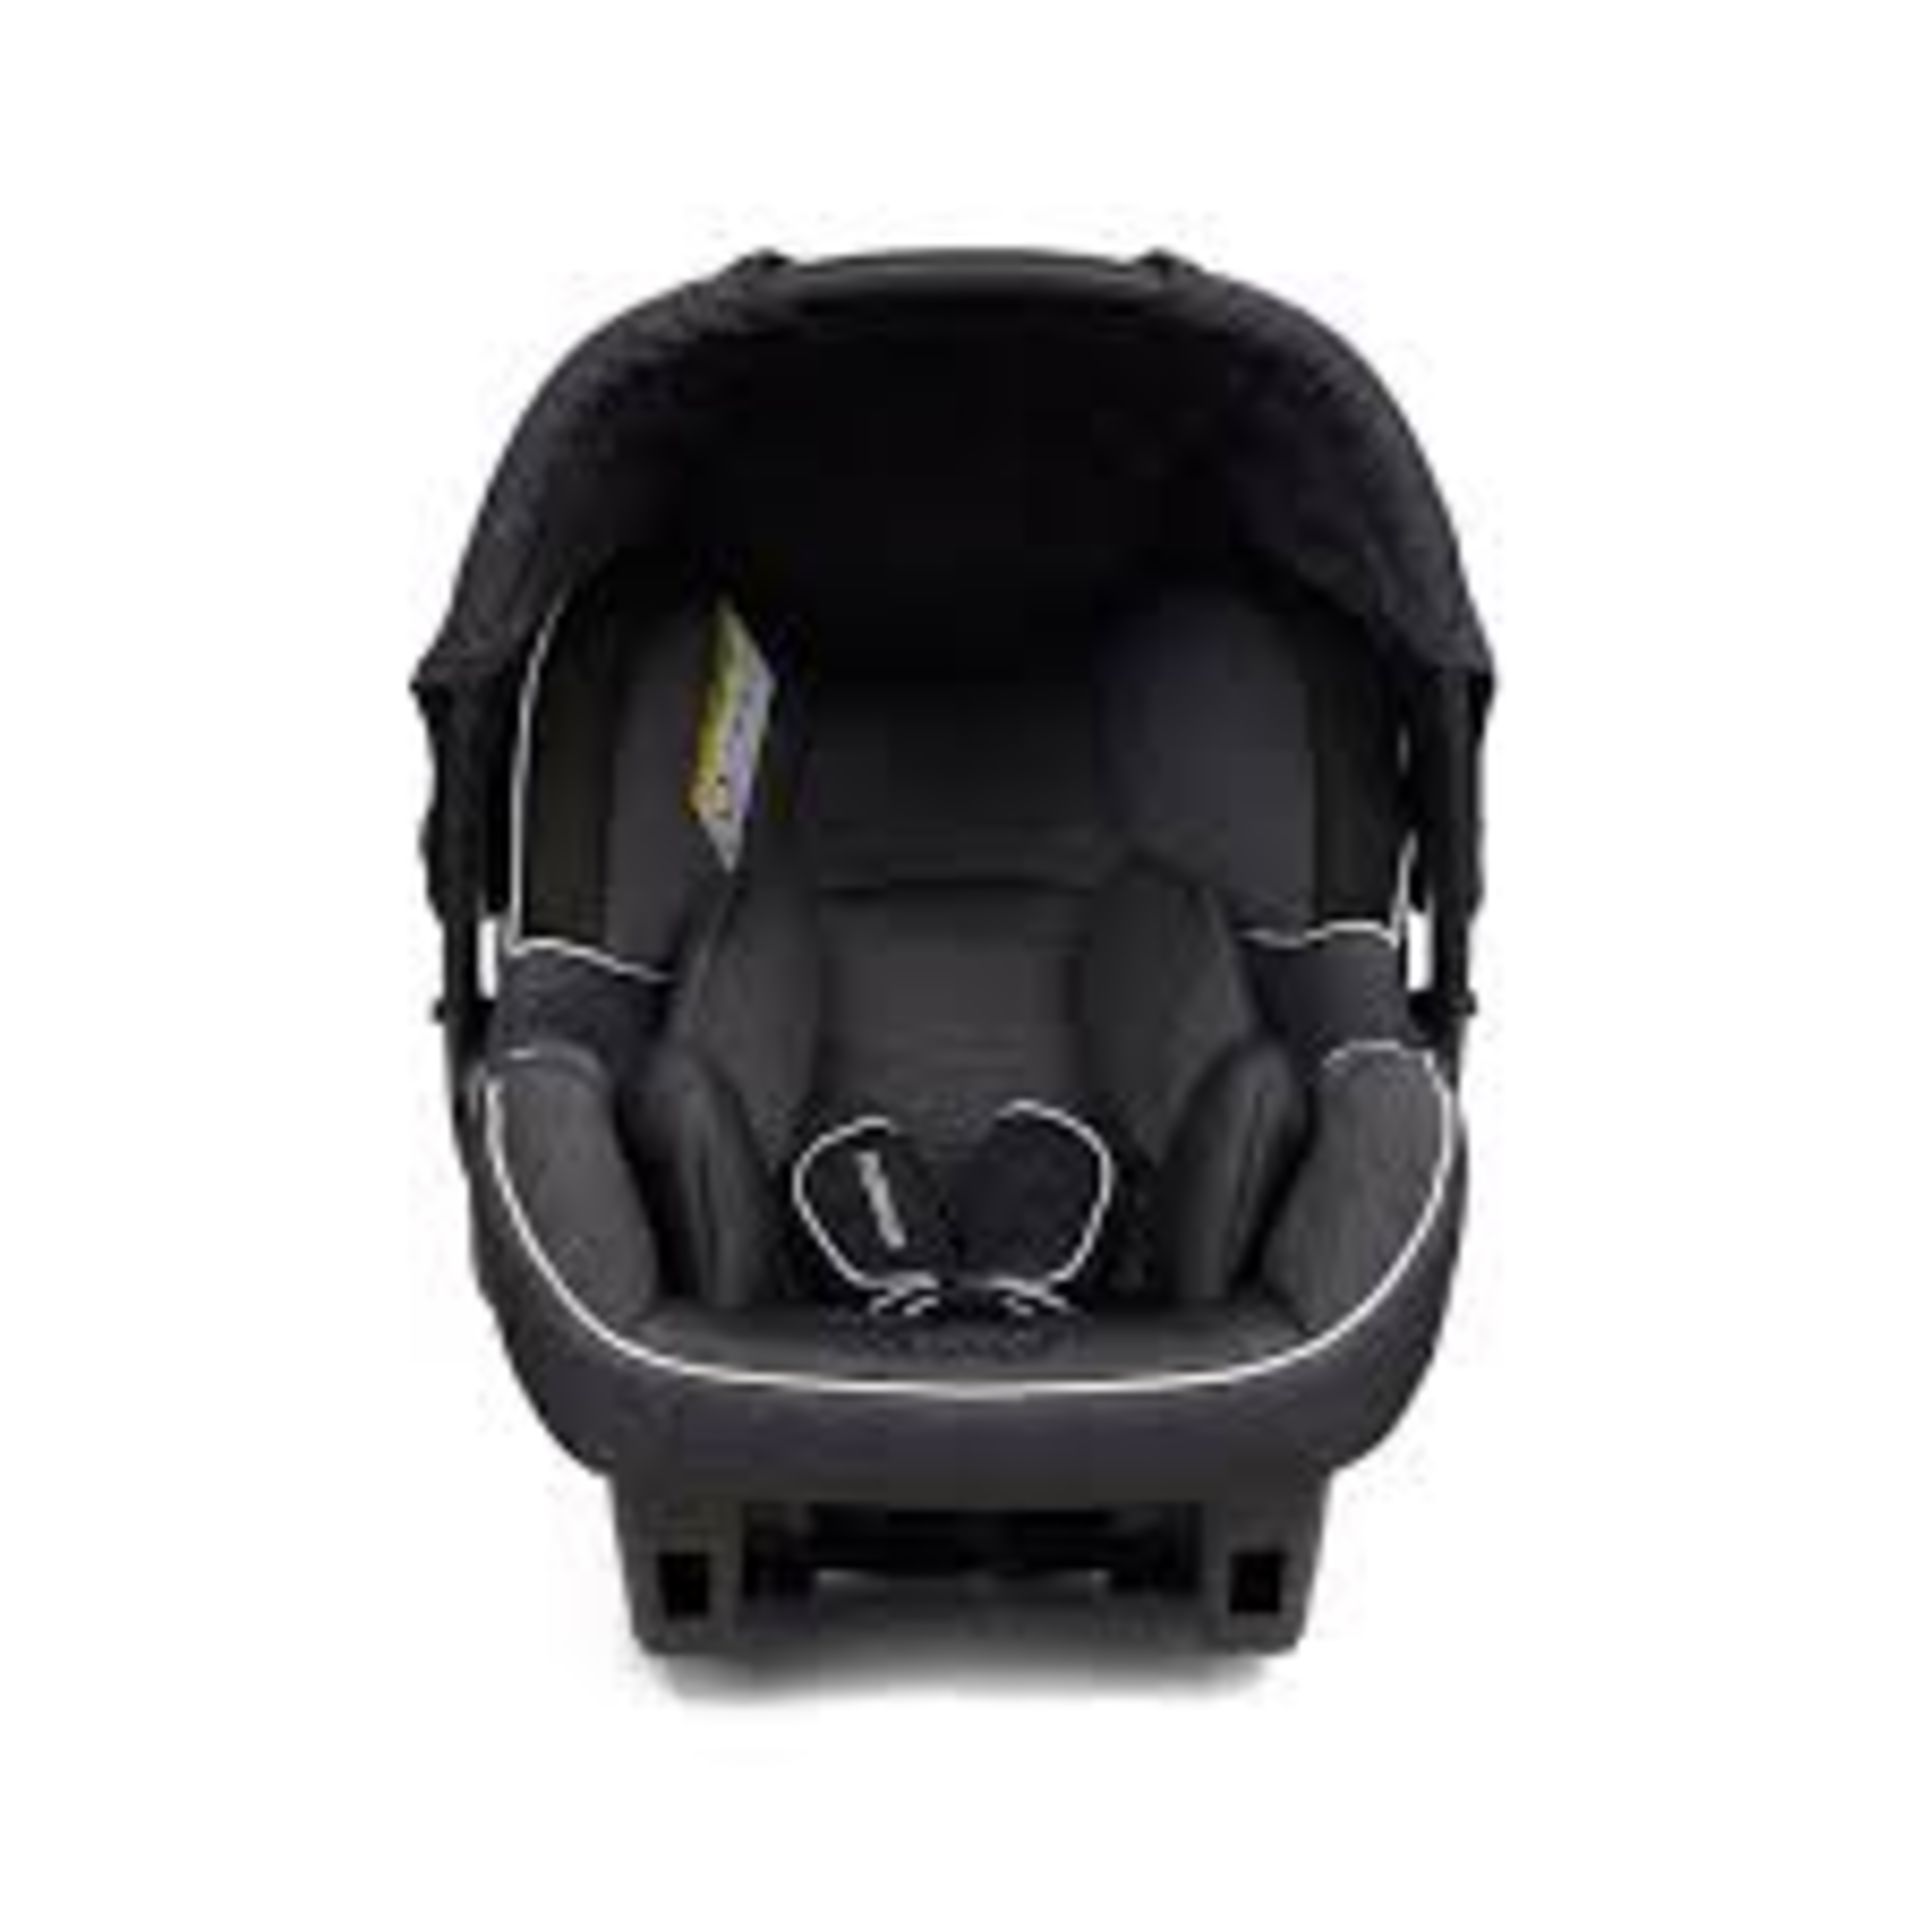 BRAND NEW MOTHERCARE ZIBA CAR SEAT BLACK AND GREY R16-2